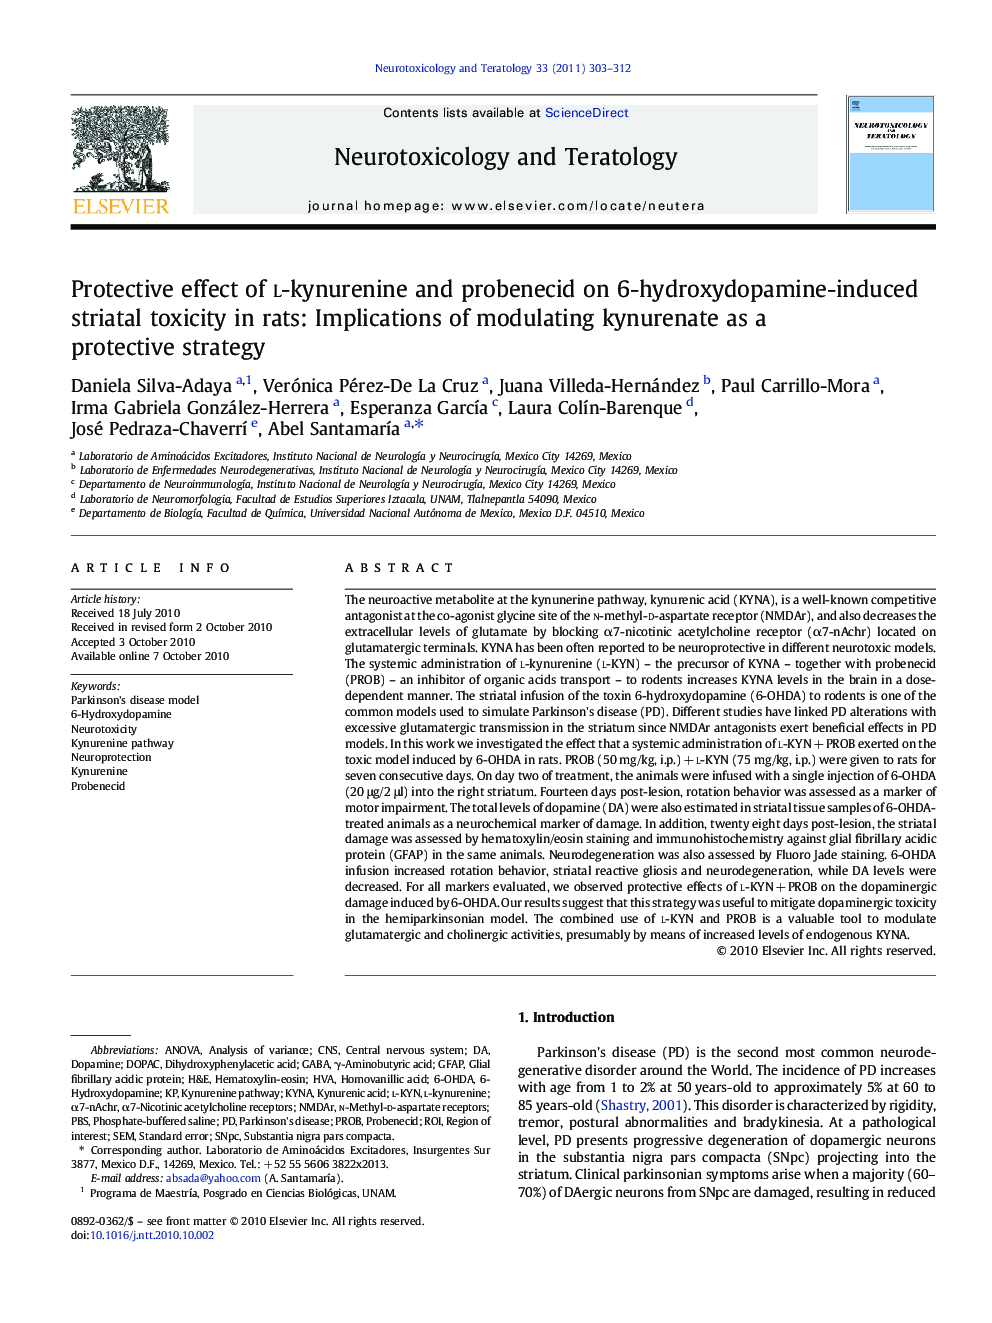 Protective effect of l-kynurenine and probenecid on 6-hydroxydopamine-induced striatal toxicity in rats: Implications of modulating kynurenate as a protective strategy